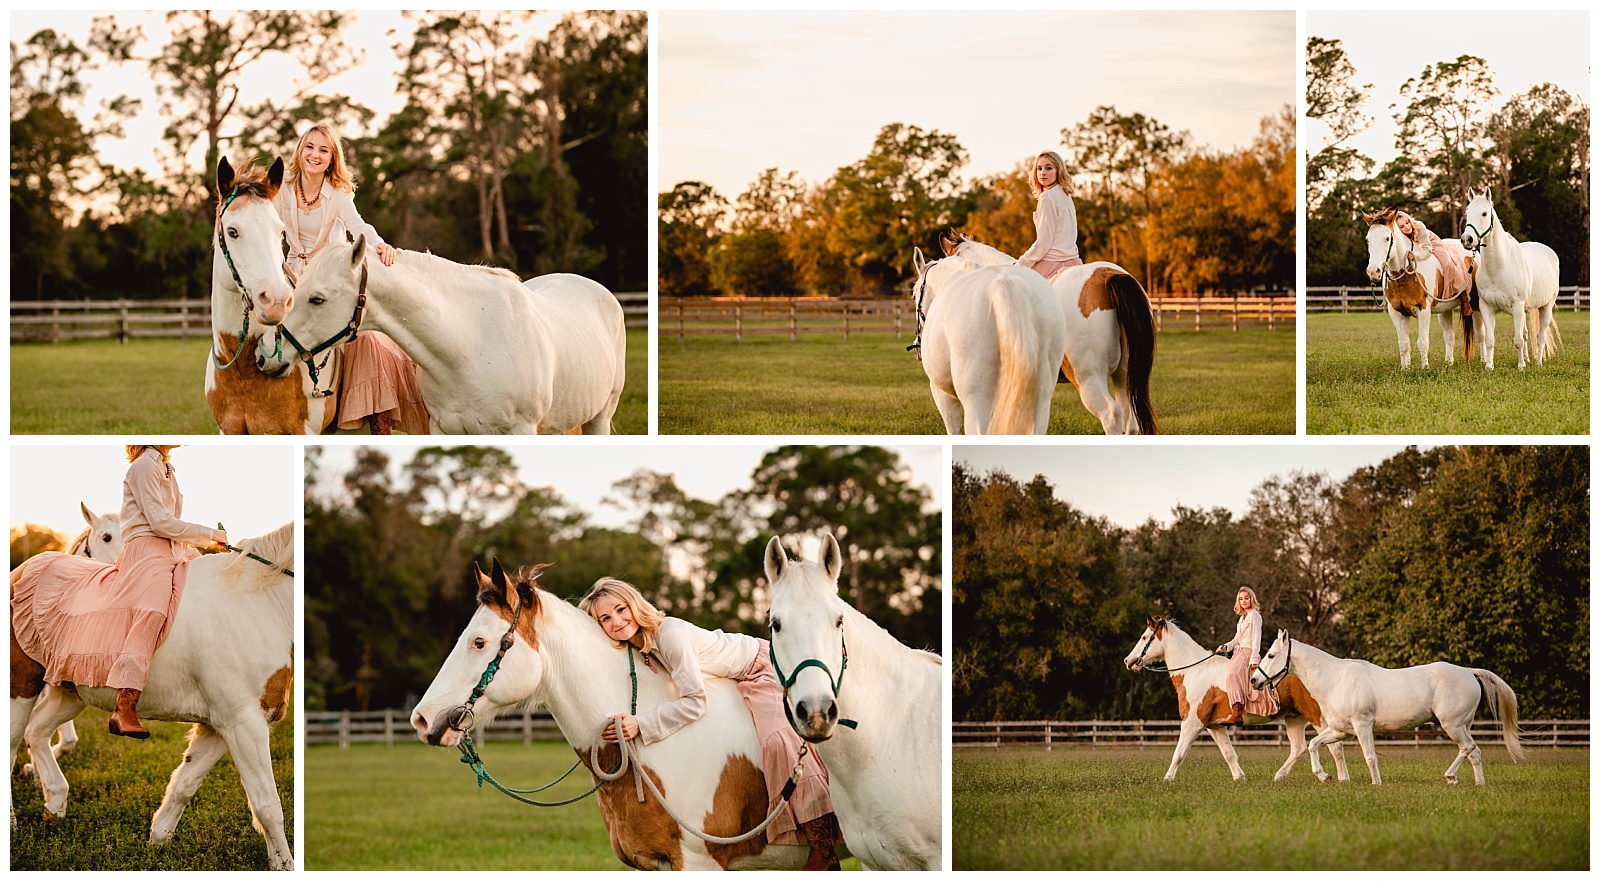 Posing ideas for equestrian with multiple horses under saddle. Florida horse photographer.